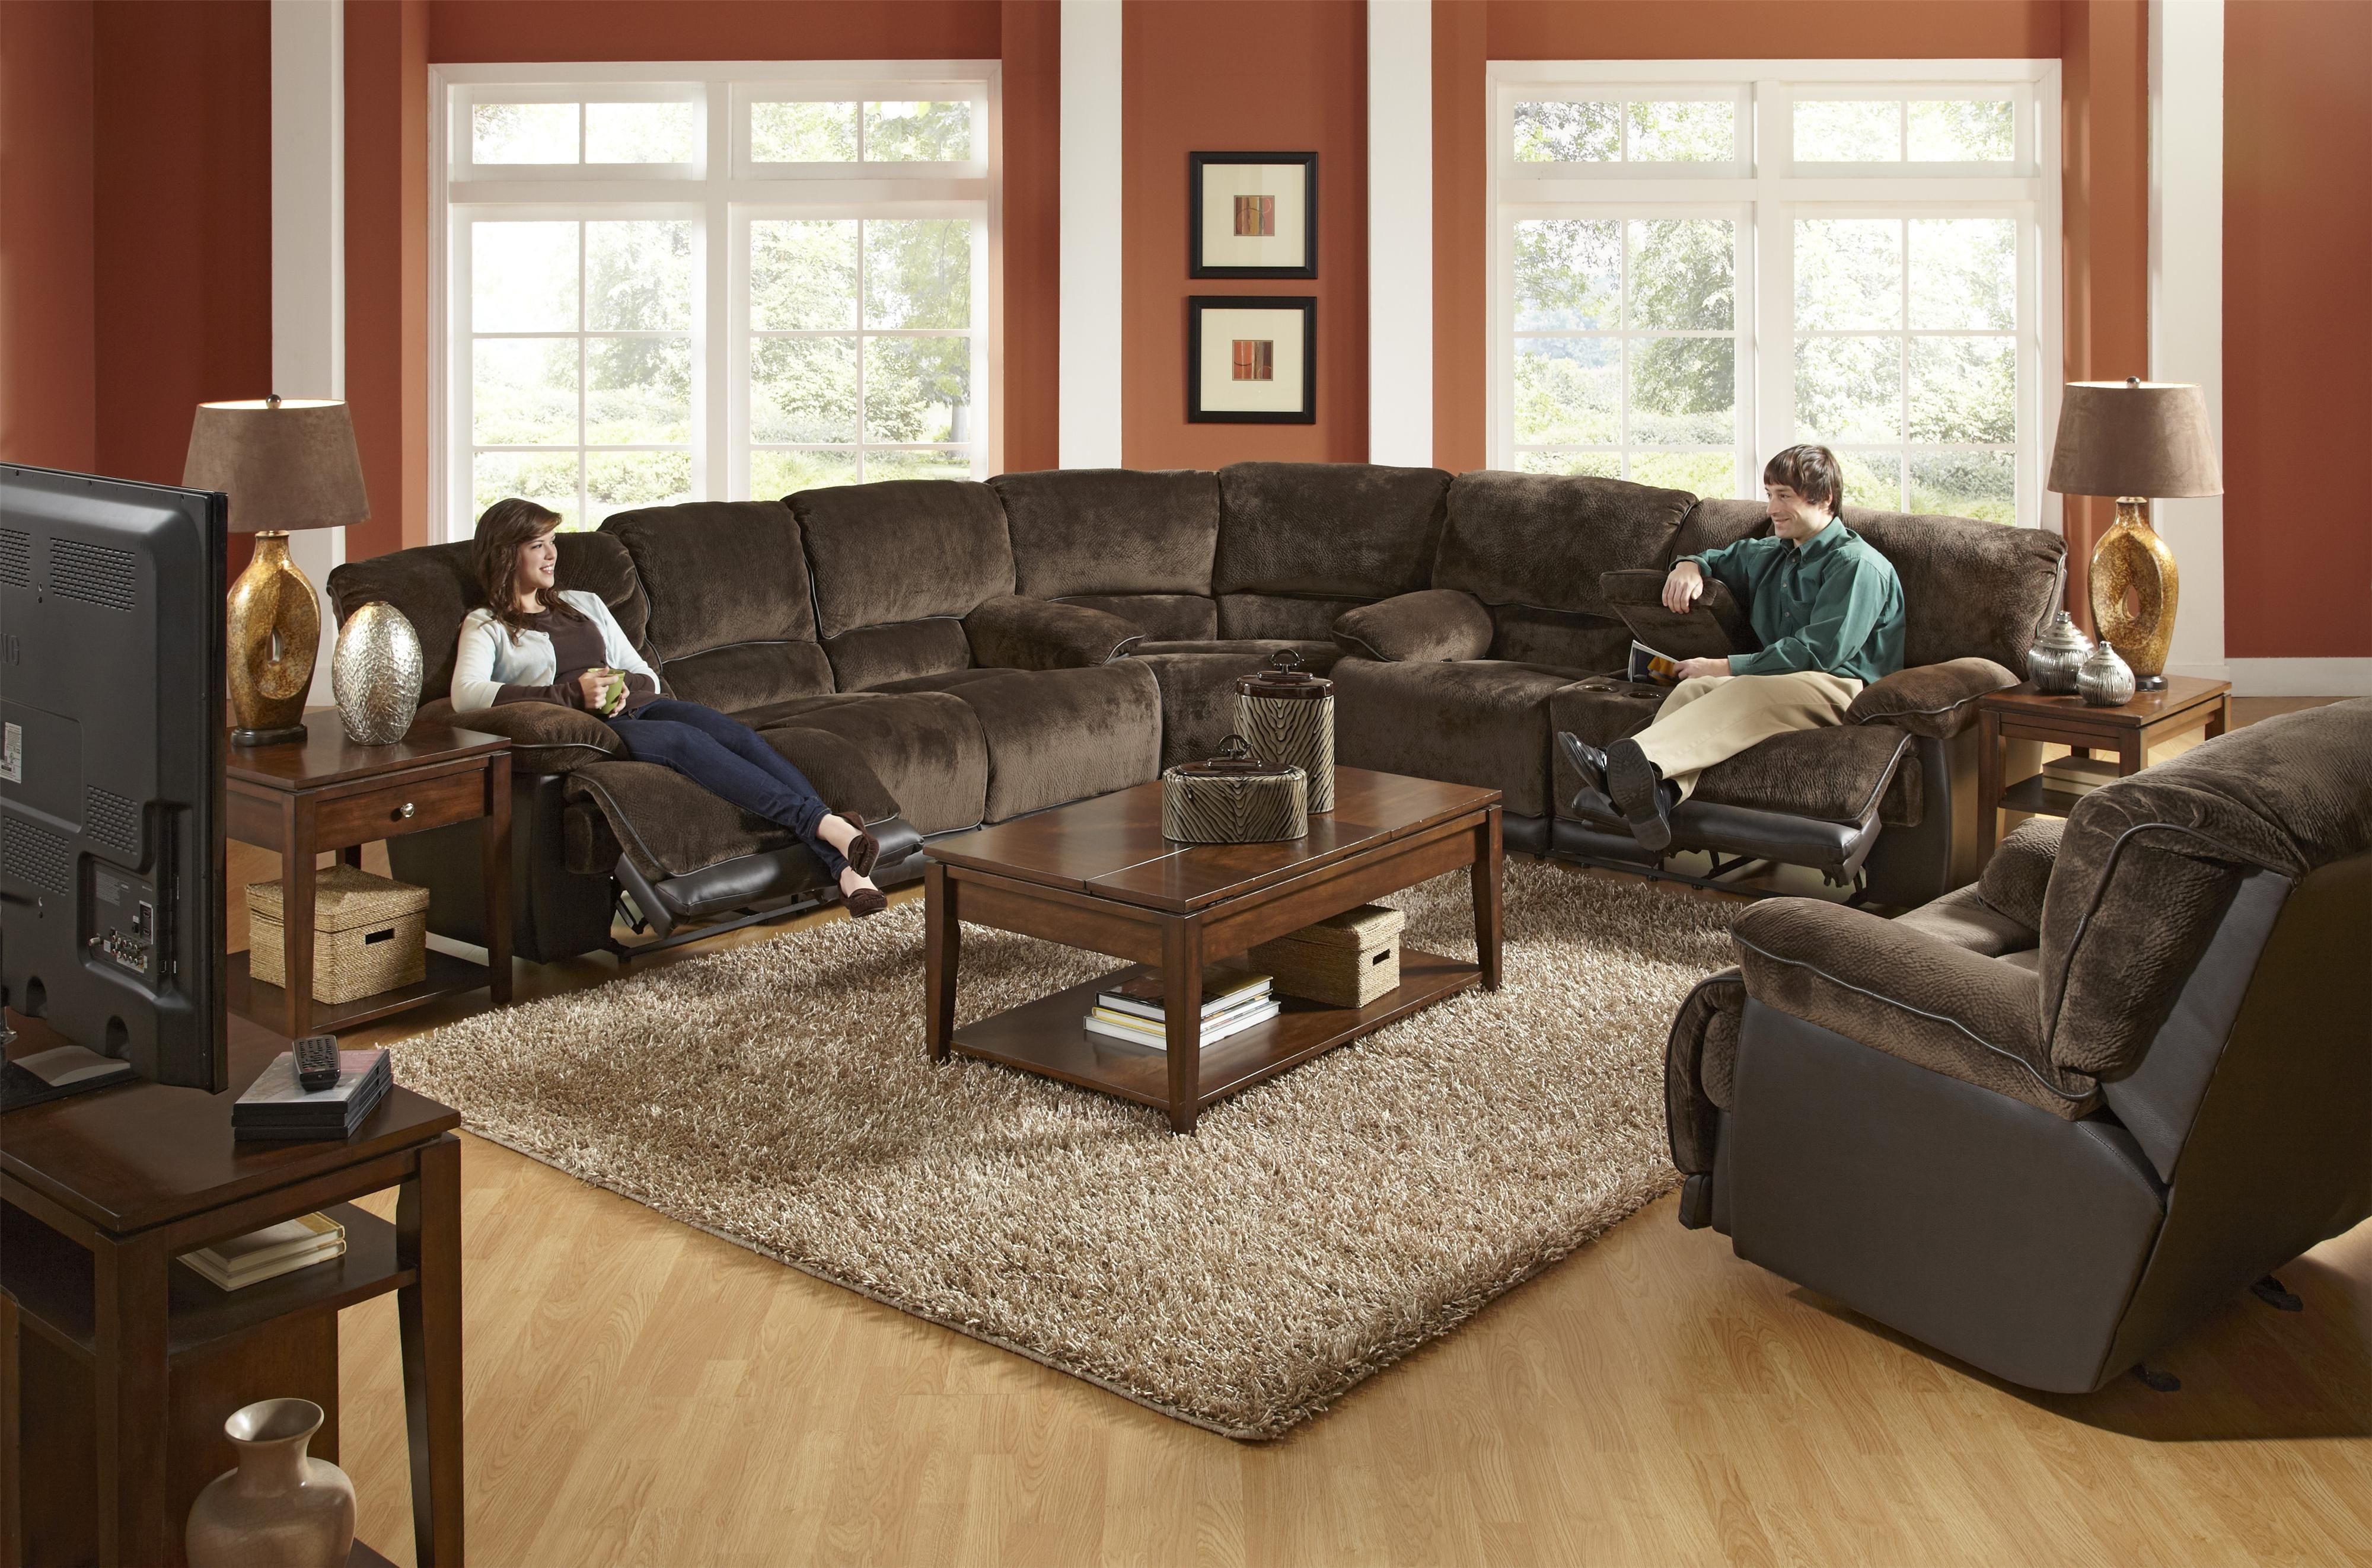 A Reclining Sectional In The Transitional Style! Catnapper Escalade Regarding Sectional Sofas With Power Recliners (View 7 of 10)